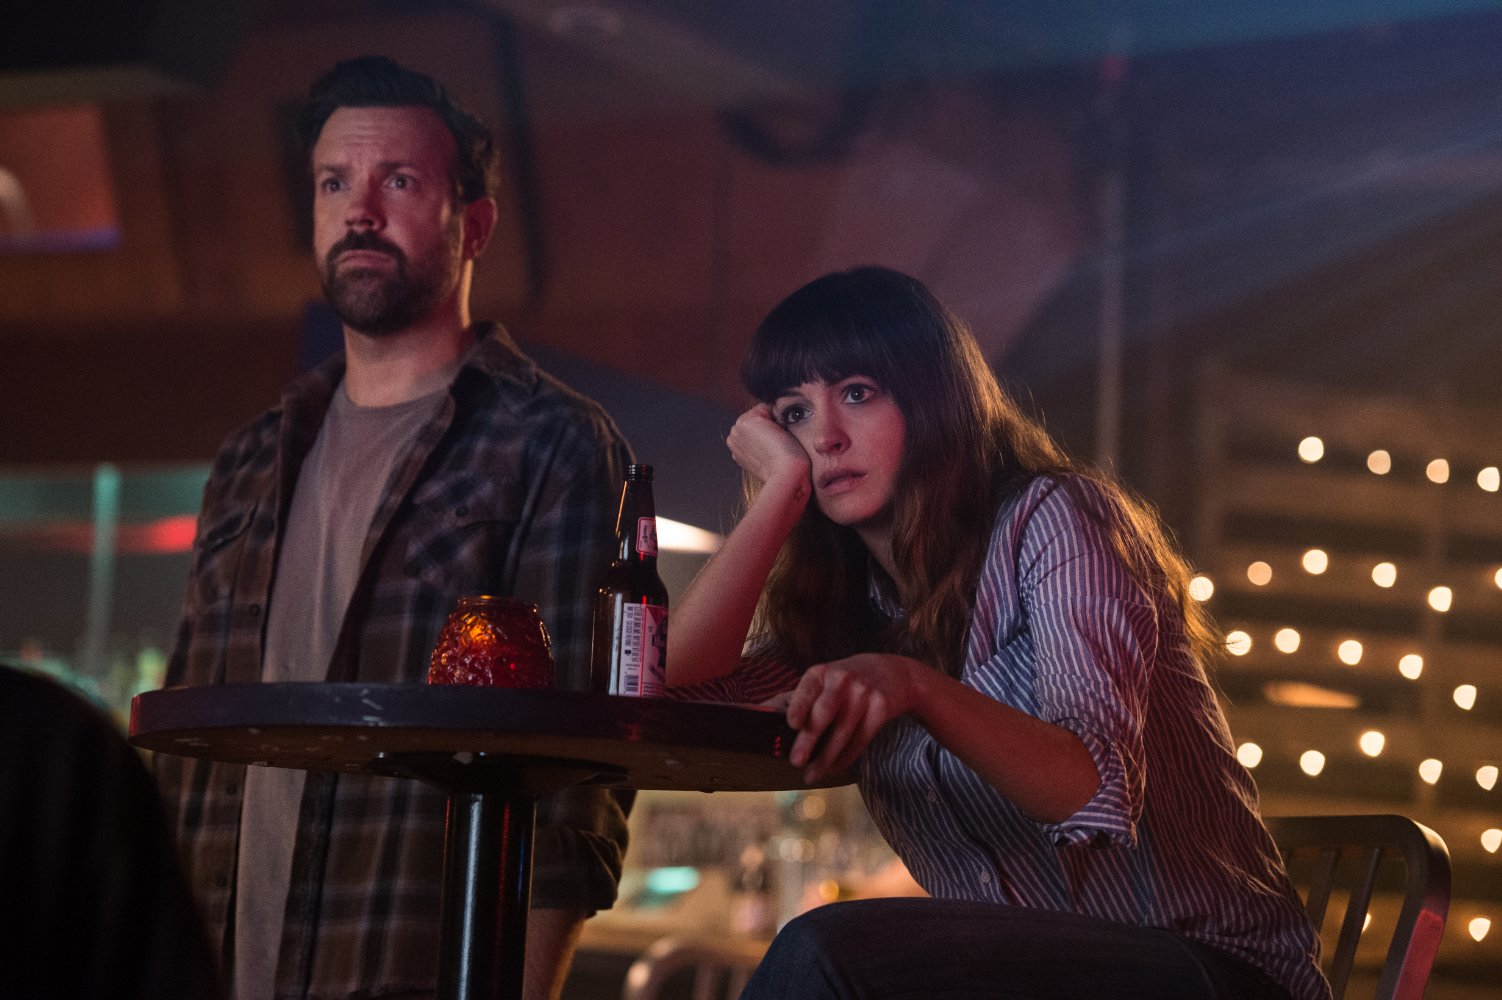 Movie Review: Anne Hathaway Is Literally A Giant Monster In The Crazy, Original, Colossal 